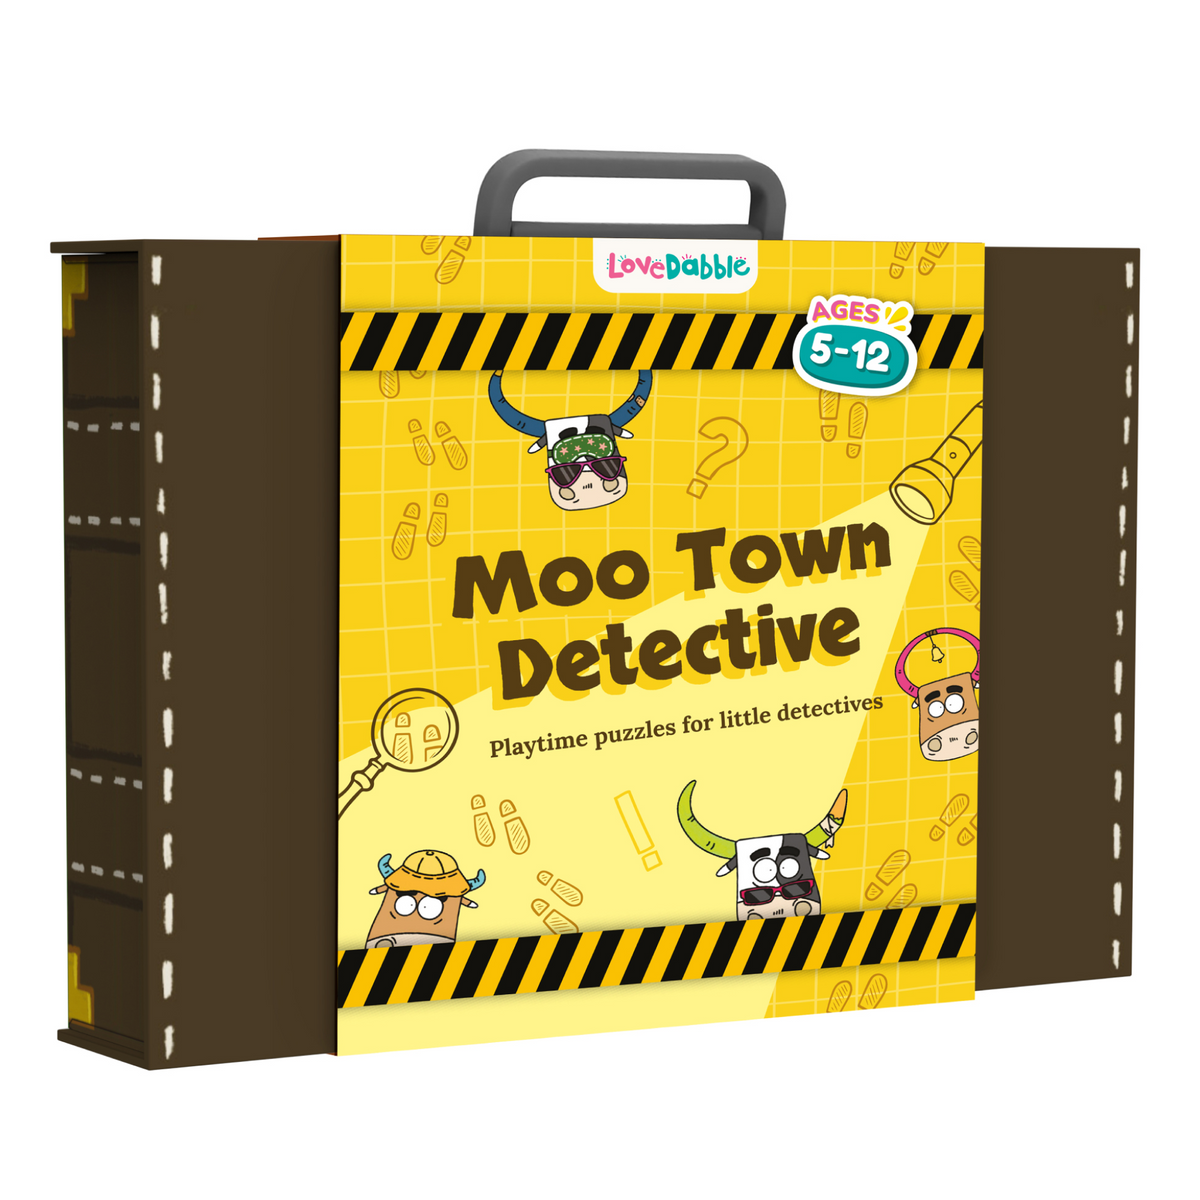 Love Dabble Moo Town Detective Playtime Puzzles For Ages 5-12 Years